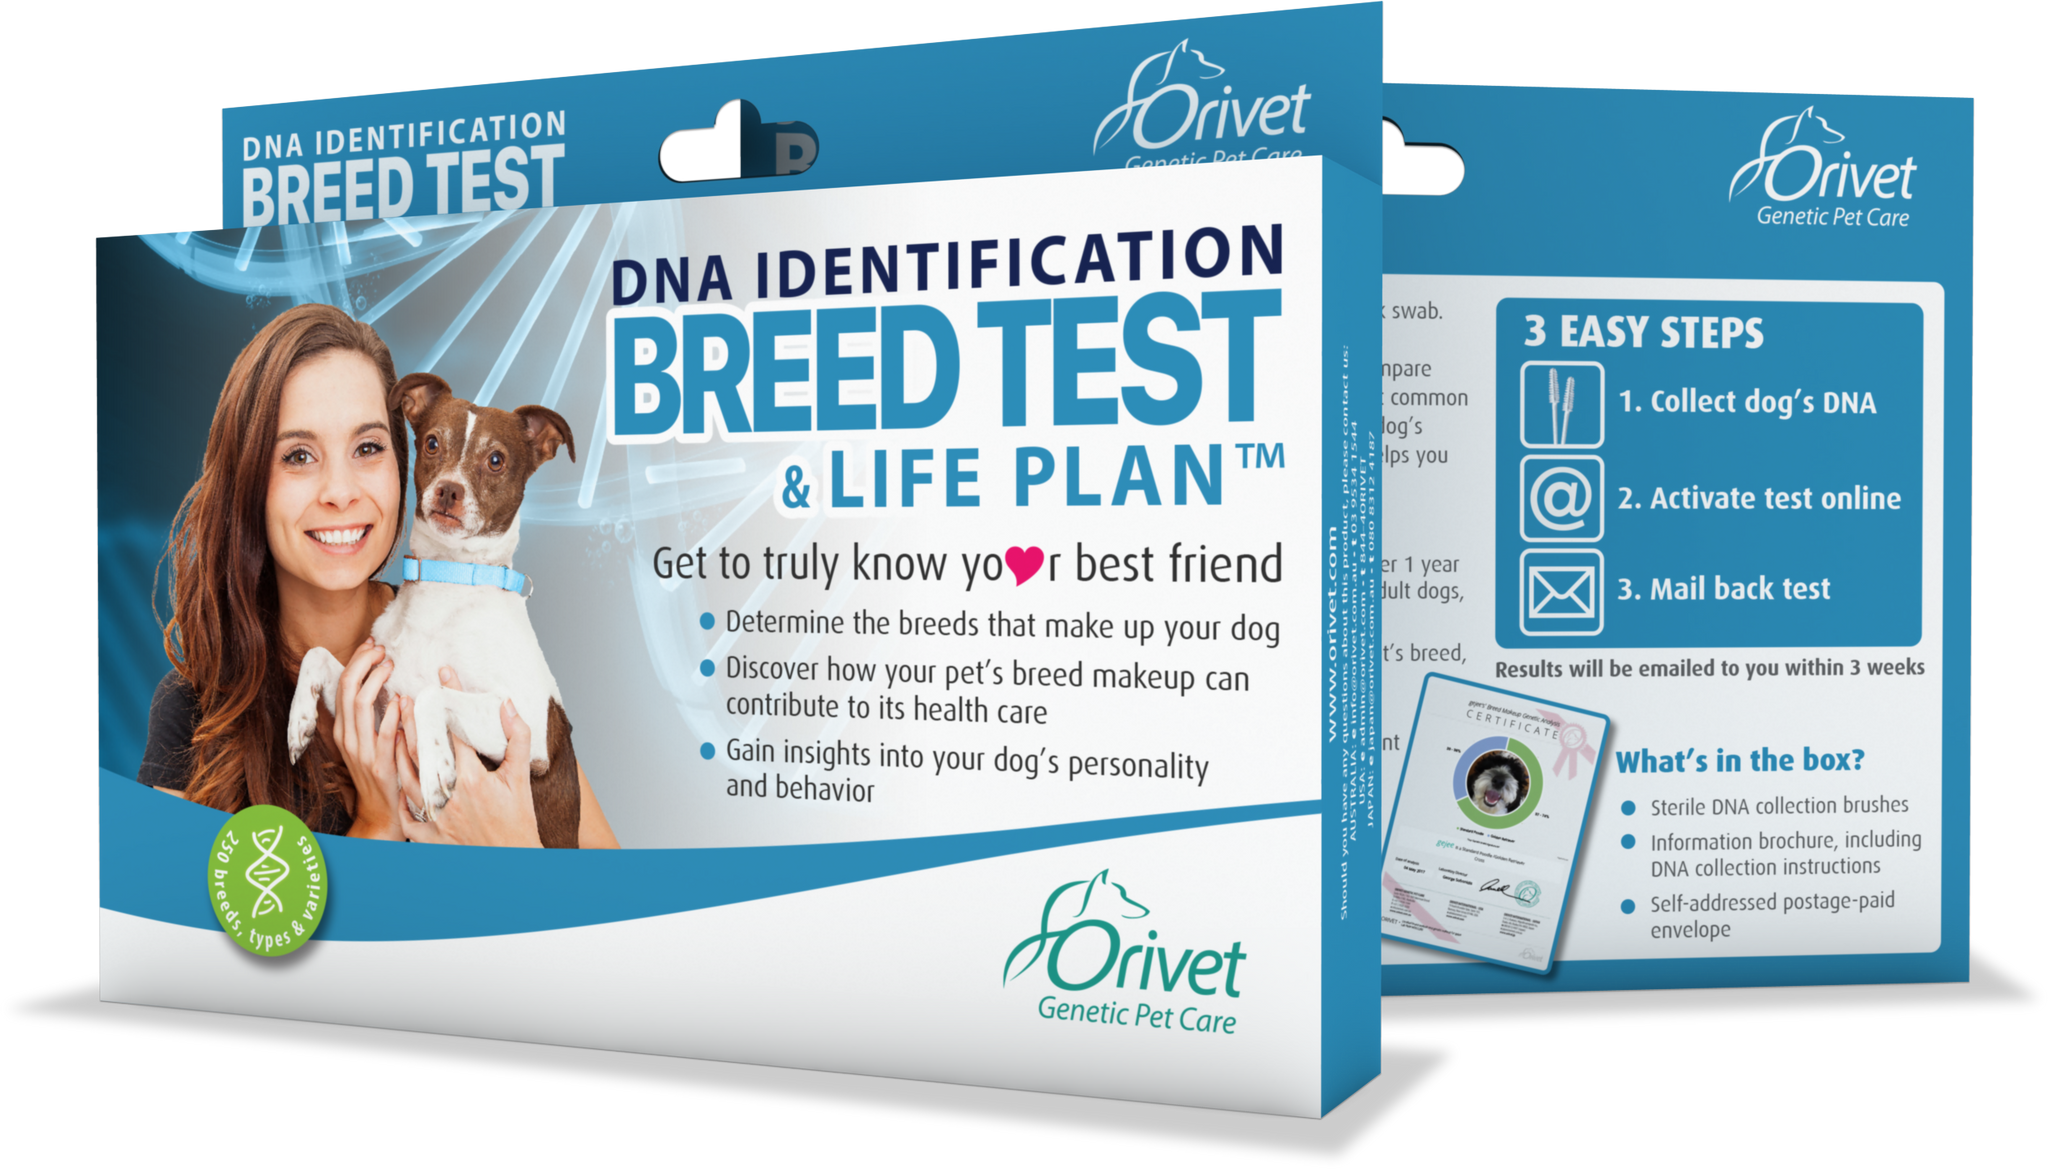 how to test dog dna to determine breed